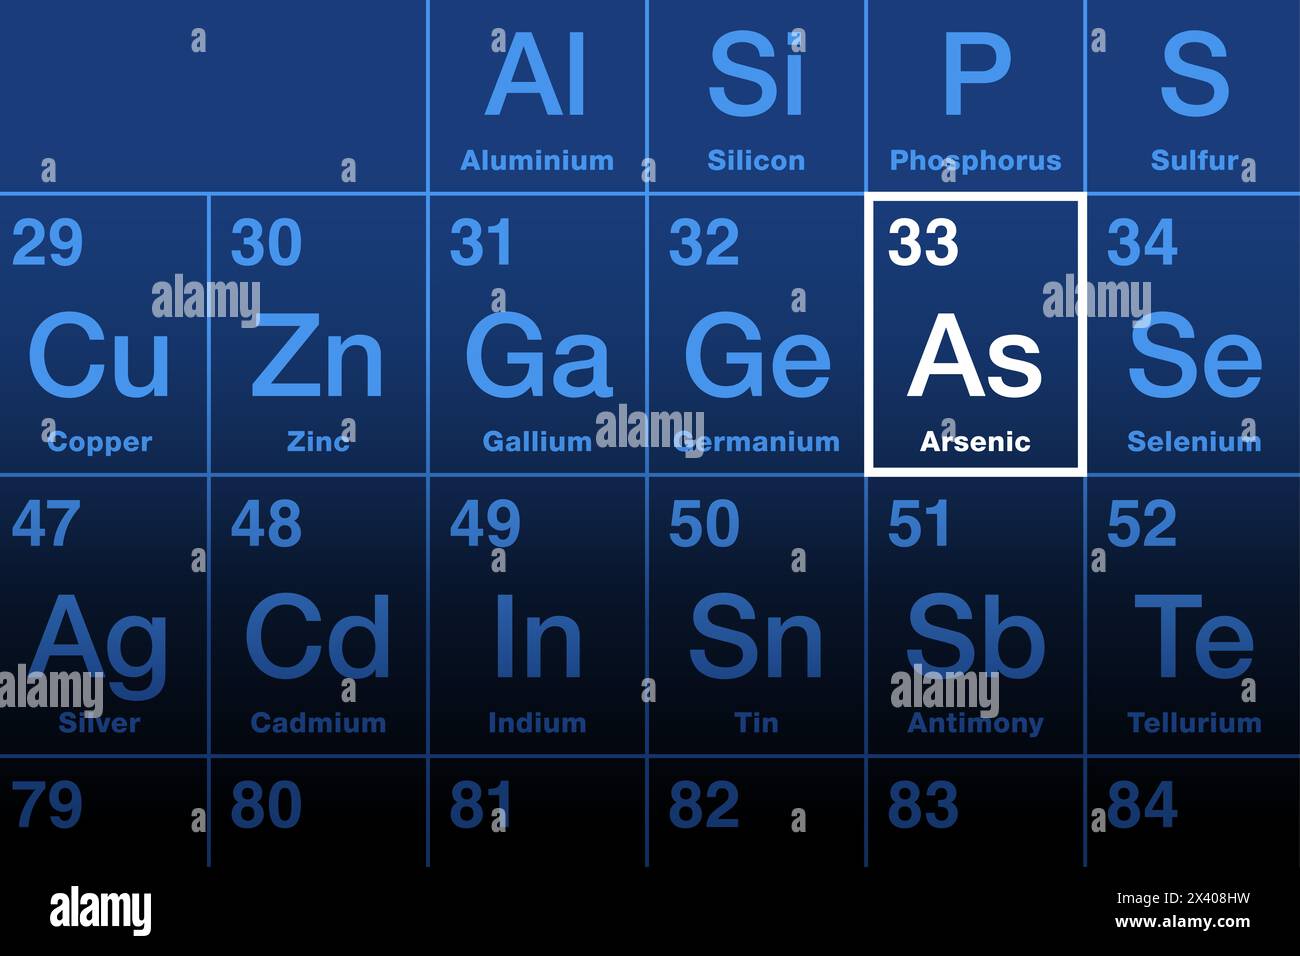 Arsenic element on the periodic table with element symbol As and with the atomic number 33. Its compounds are especially potent poisons. Stock Photo